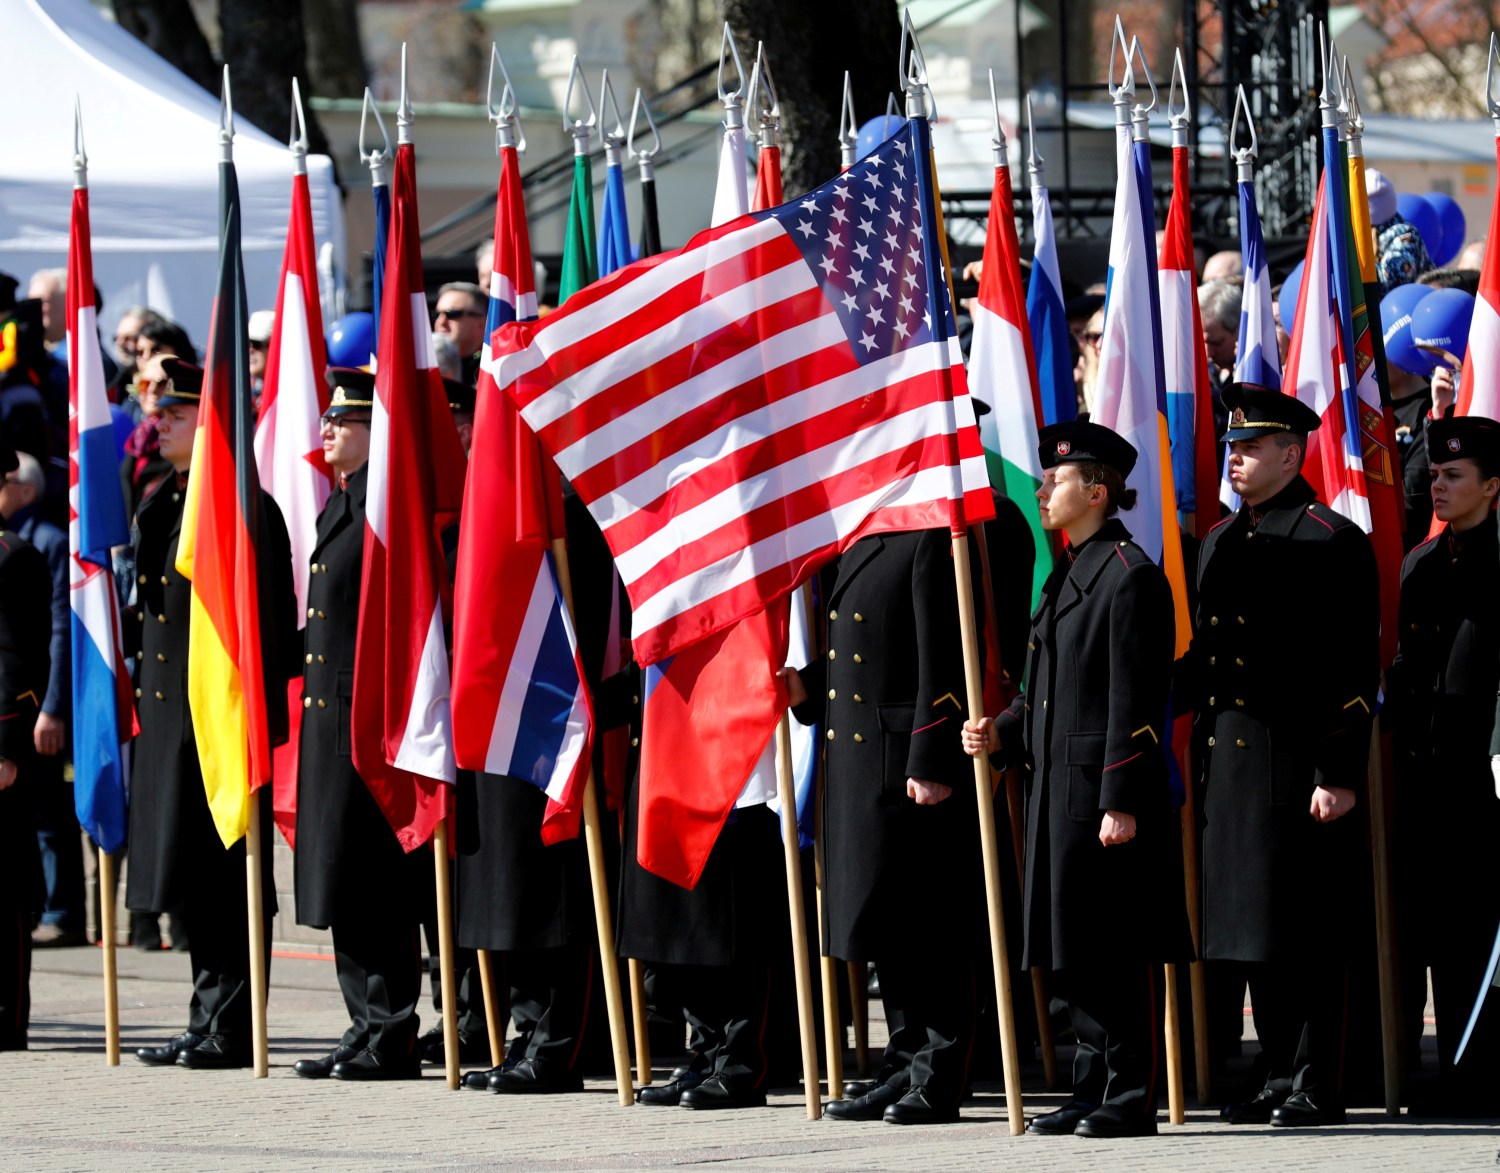 Lithuanian Military Academy students hold NATO membership states flags during the celebration of the 15th anniversary of Lithuania's membership in NATO in Vilnius, Lithuania March 30, 2019. REUTERS/Ints Kalnins